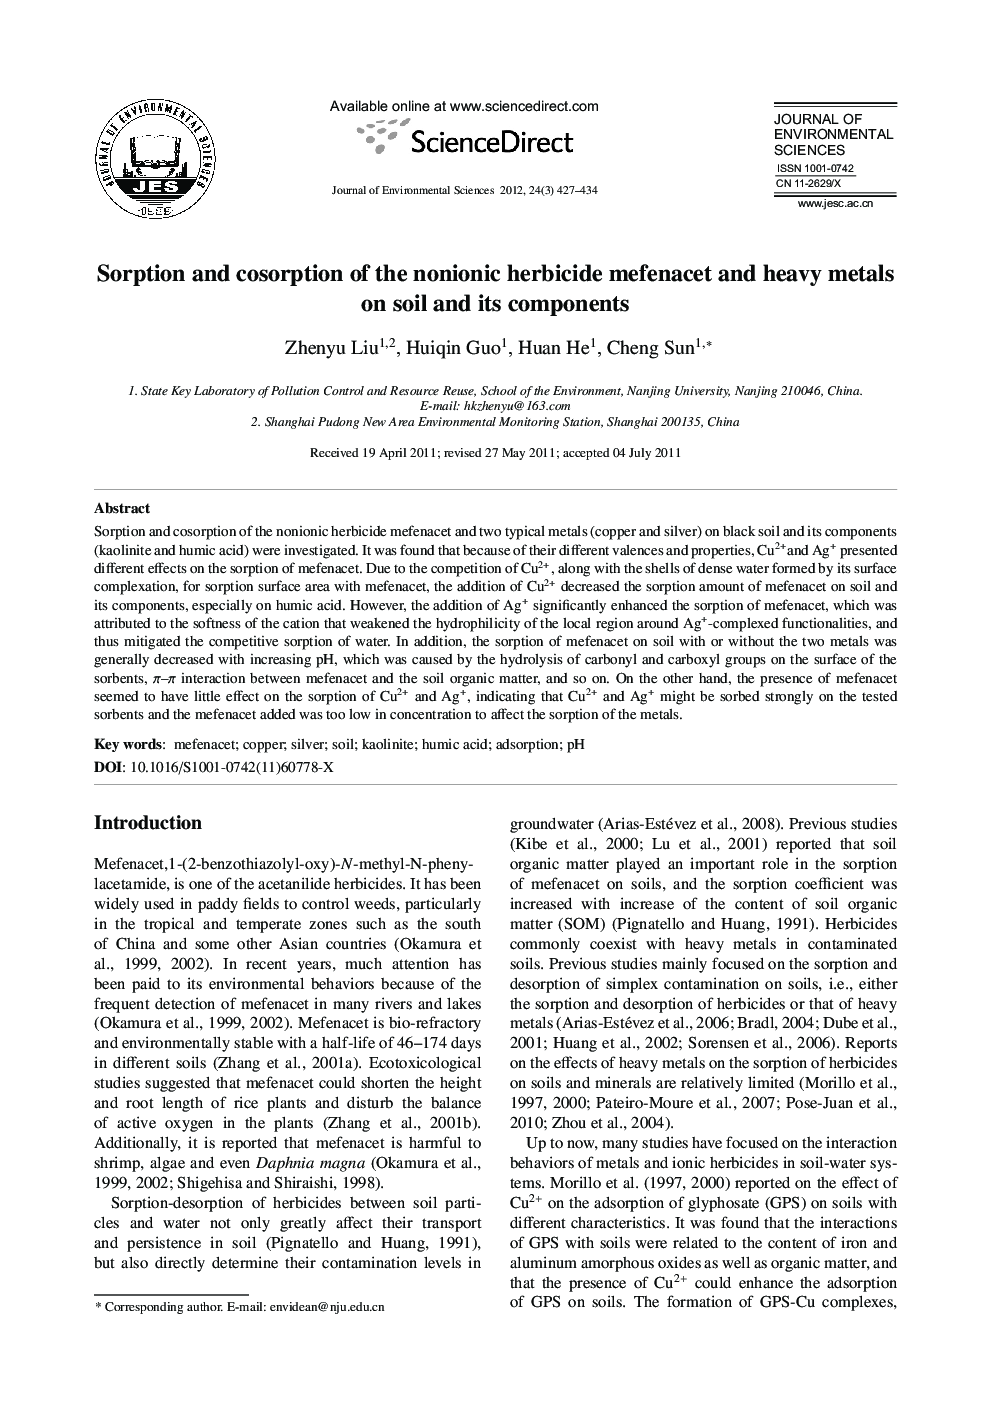 Sorption and cosorption of the nonionic herbicide mefenacet and heavy metals on soil and its components